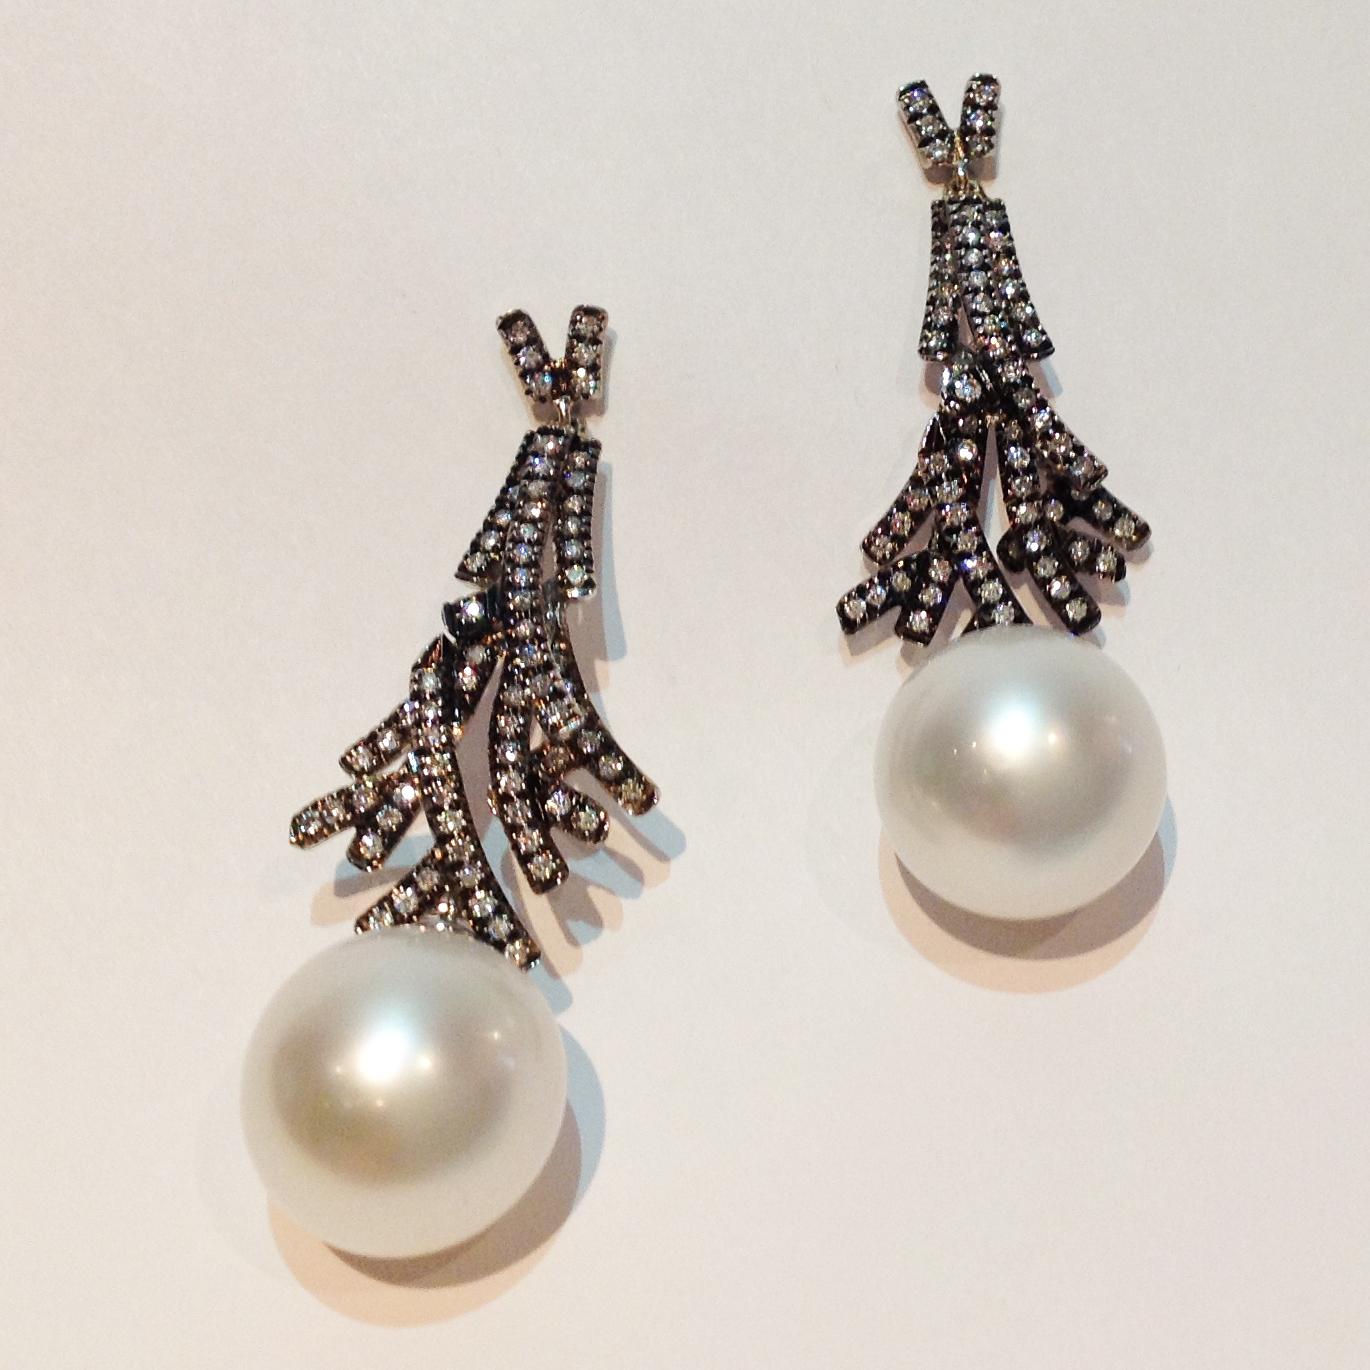 Earrings in 18kt white gold which sets Diamonds for 1,26 ct, South Sea Pearl for 60,00 ct.
Designed and hand-crafted in our Atelier in Italy.
